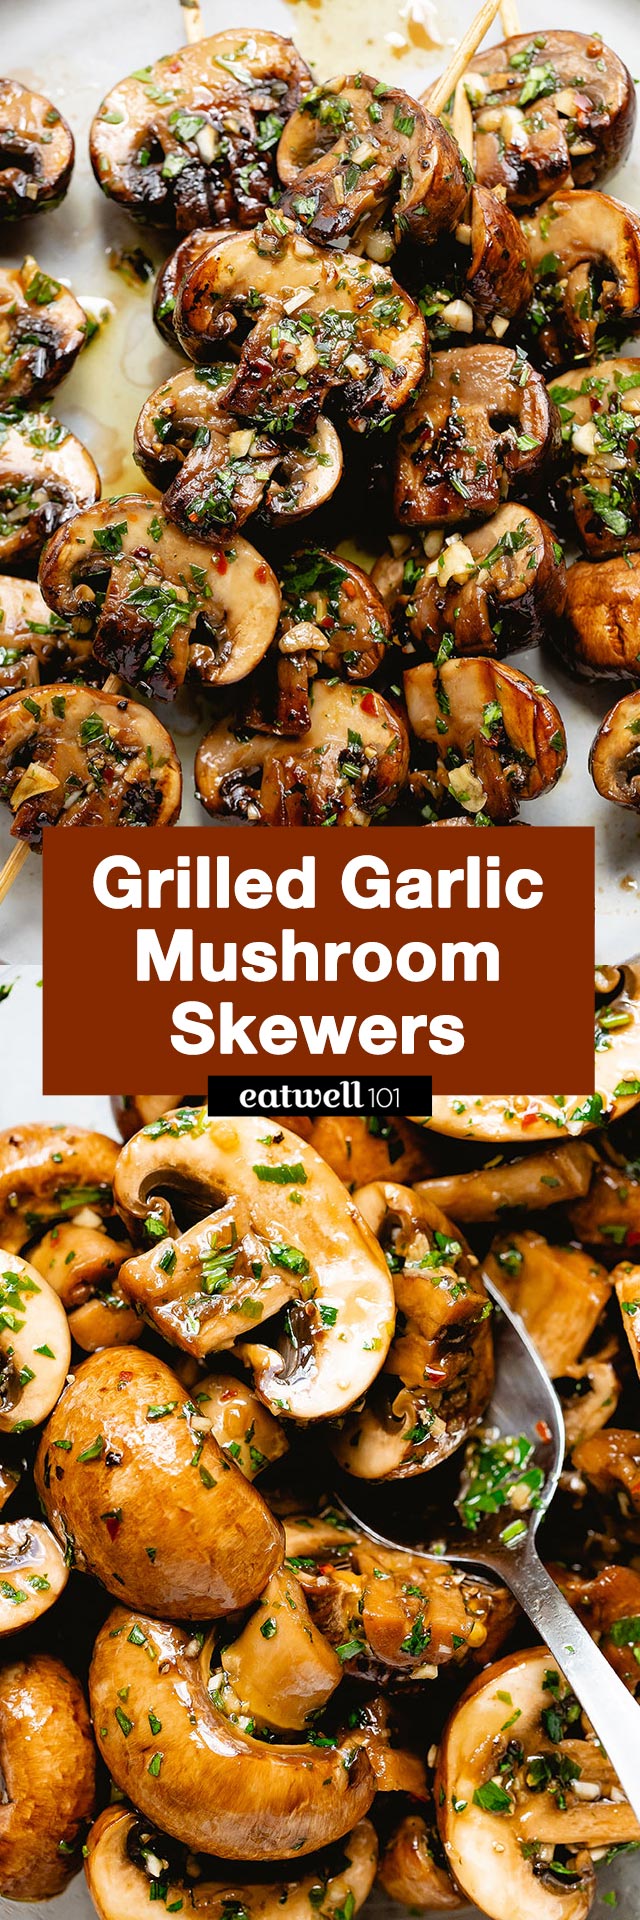 Grilled Mushroom Skewers Recipe - #mushroom #grilled #recipe #eatwell101 - These grilled garlic mushrooms on skewers are so good, you’ll want to make them every single day of the week!